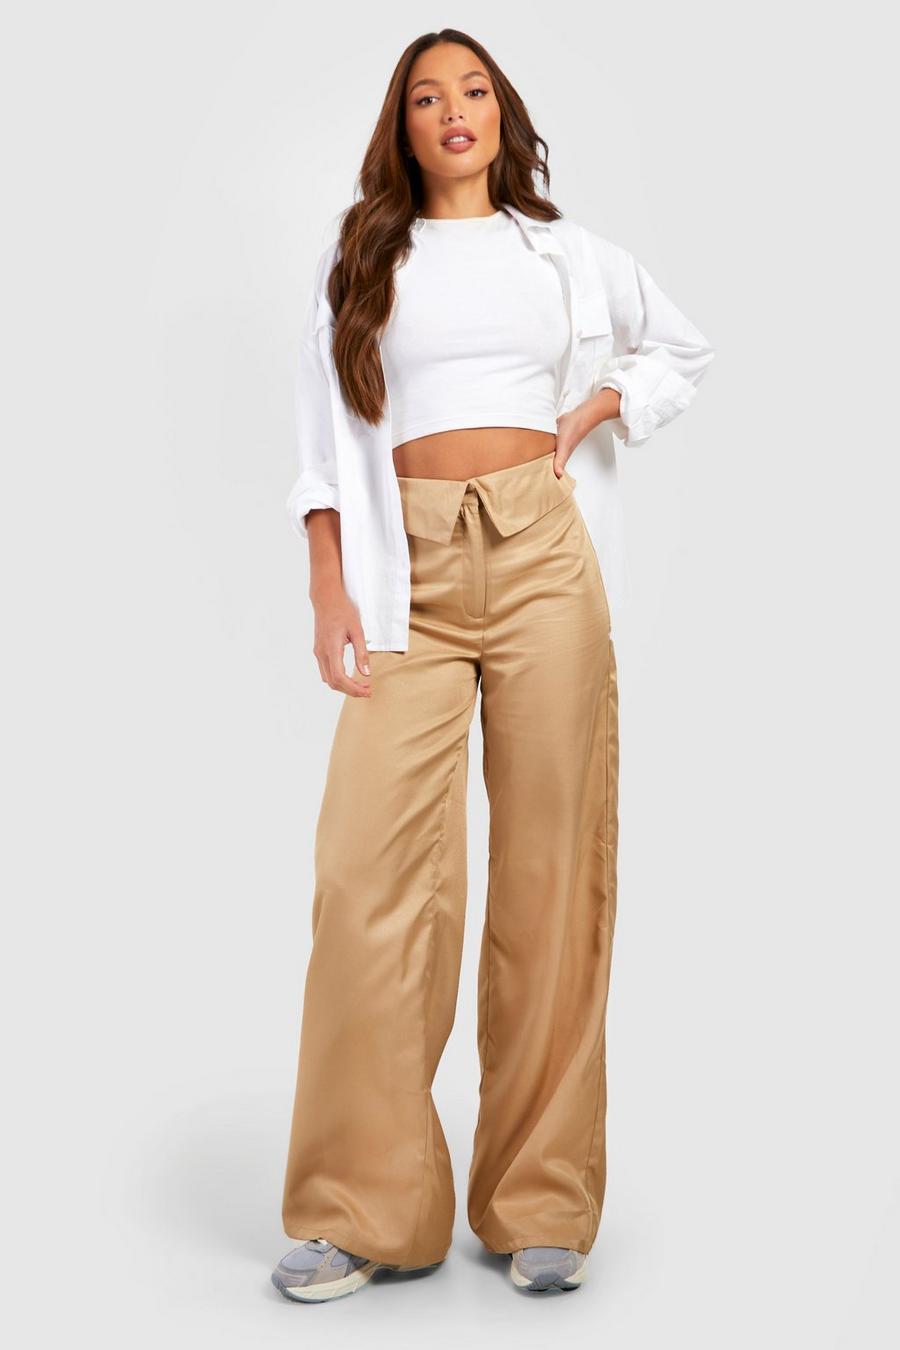 fvwitlyh Pants for Women Pants for Women Fashion Wide Leg For